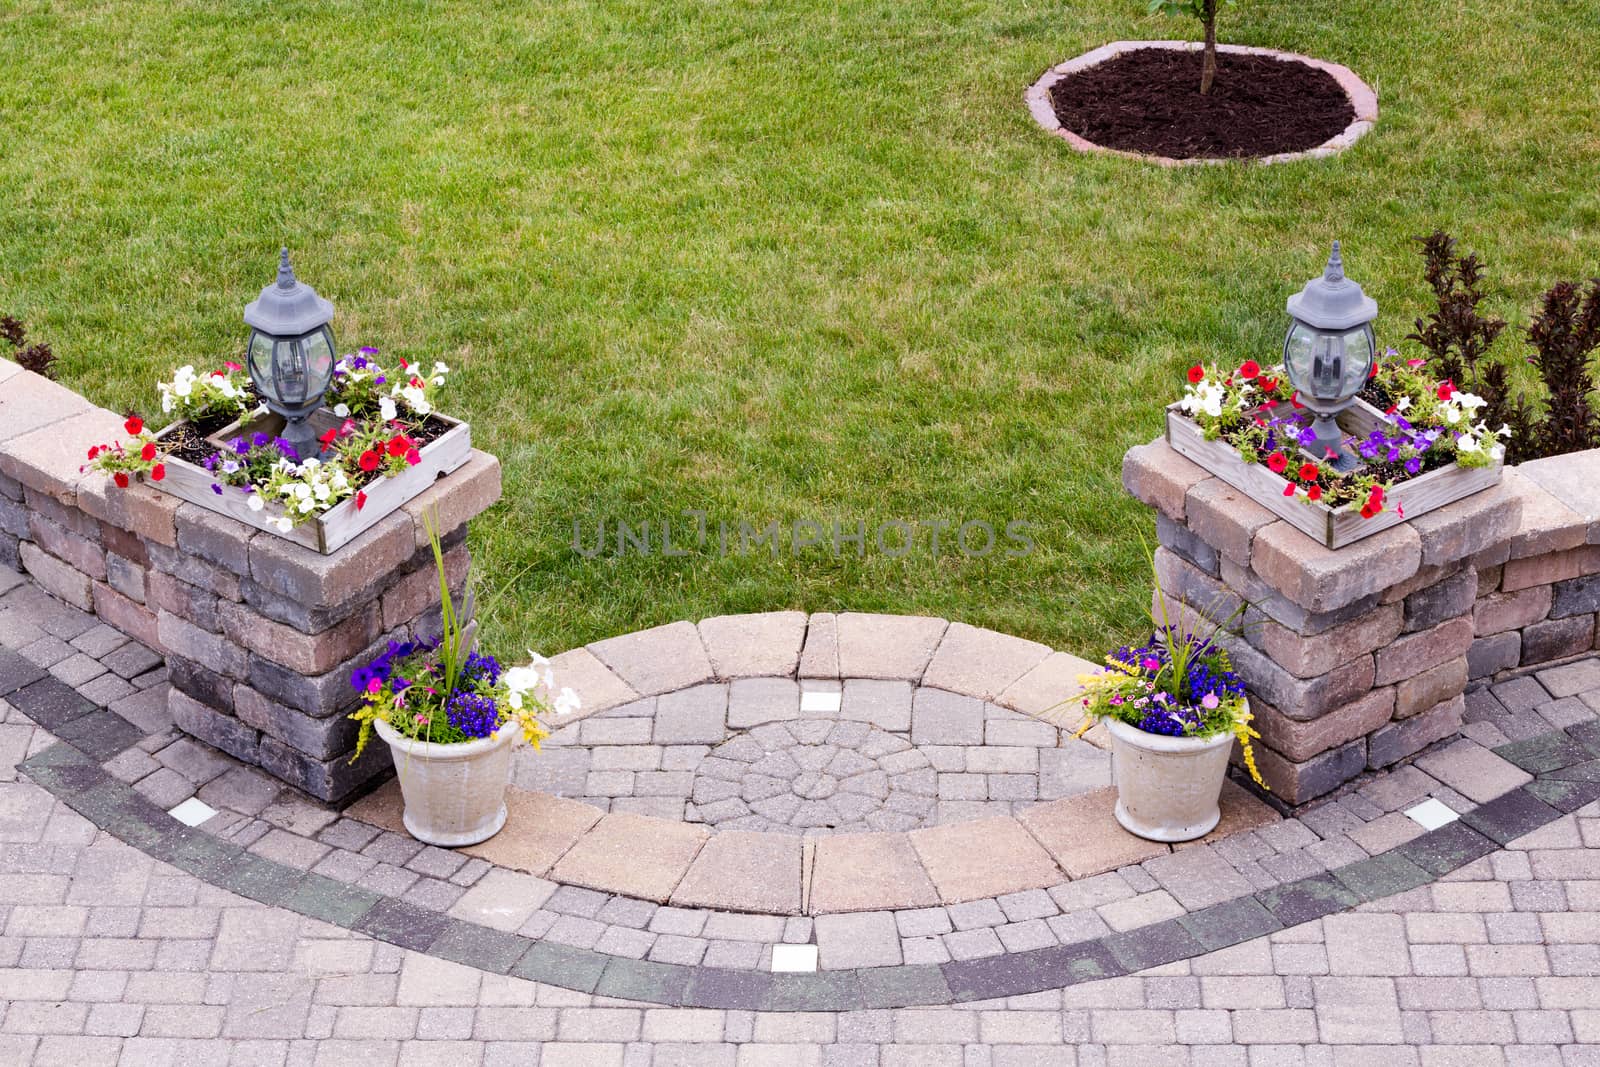 Curved entrance to an outdoors patio with shallow steps leading to a brick paved living area flanked by two pillars with lamps and colorful flowers in square pots, high angle view with green grass